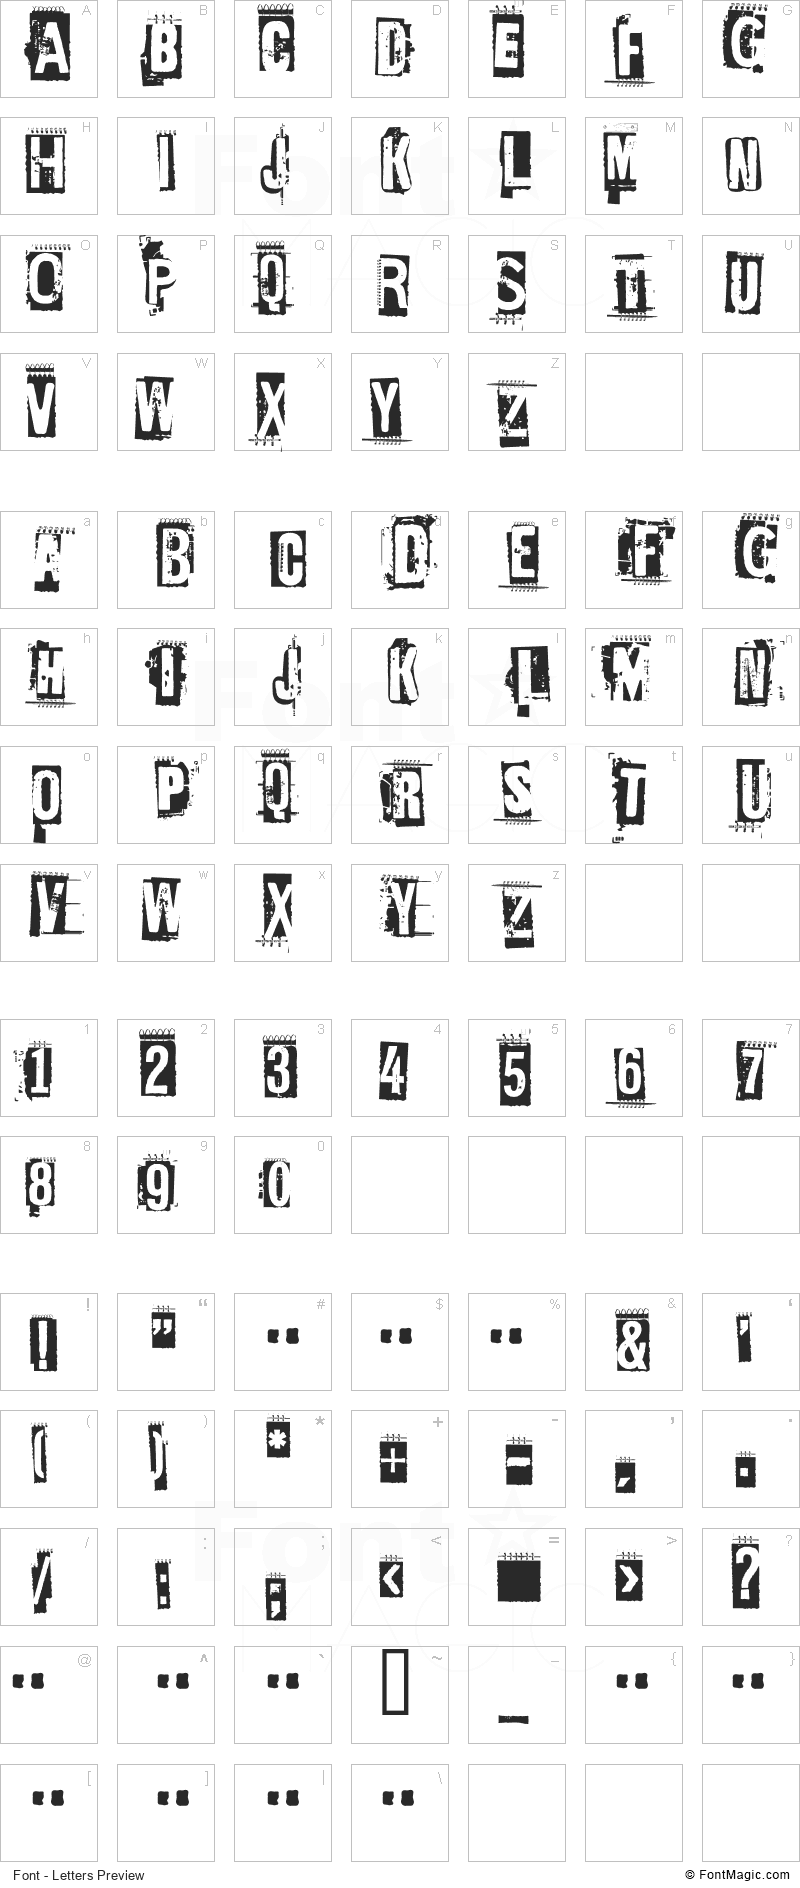 Ed Gein Font - All Latters Preview Chart